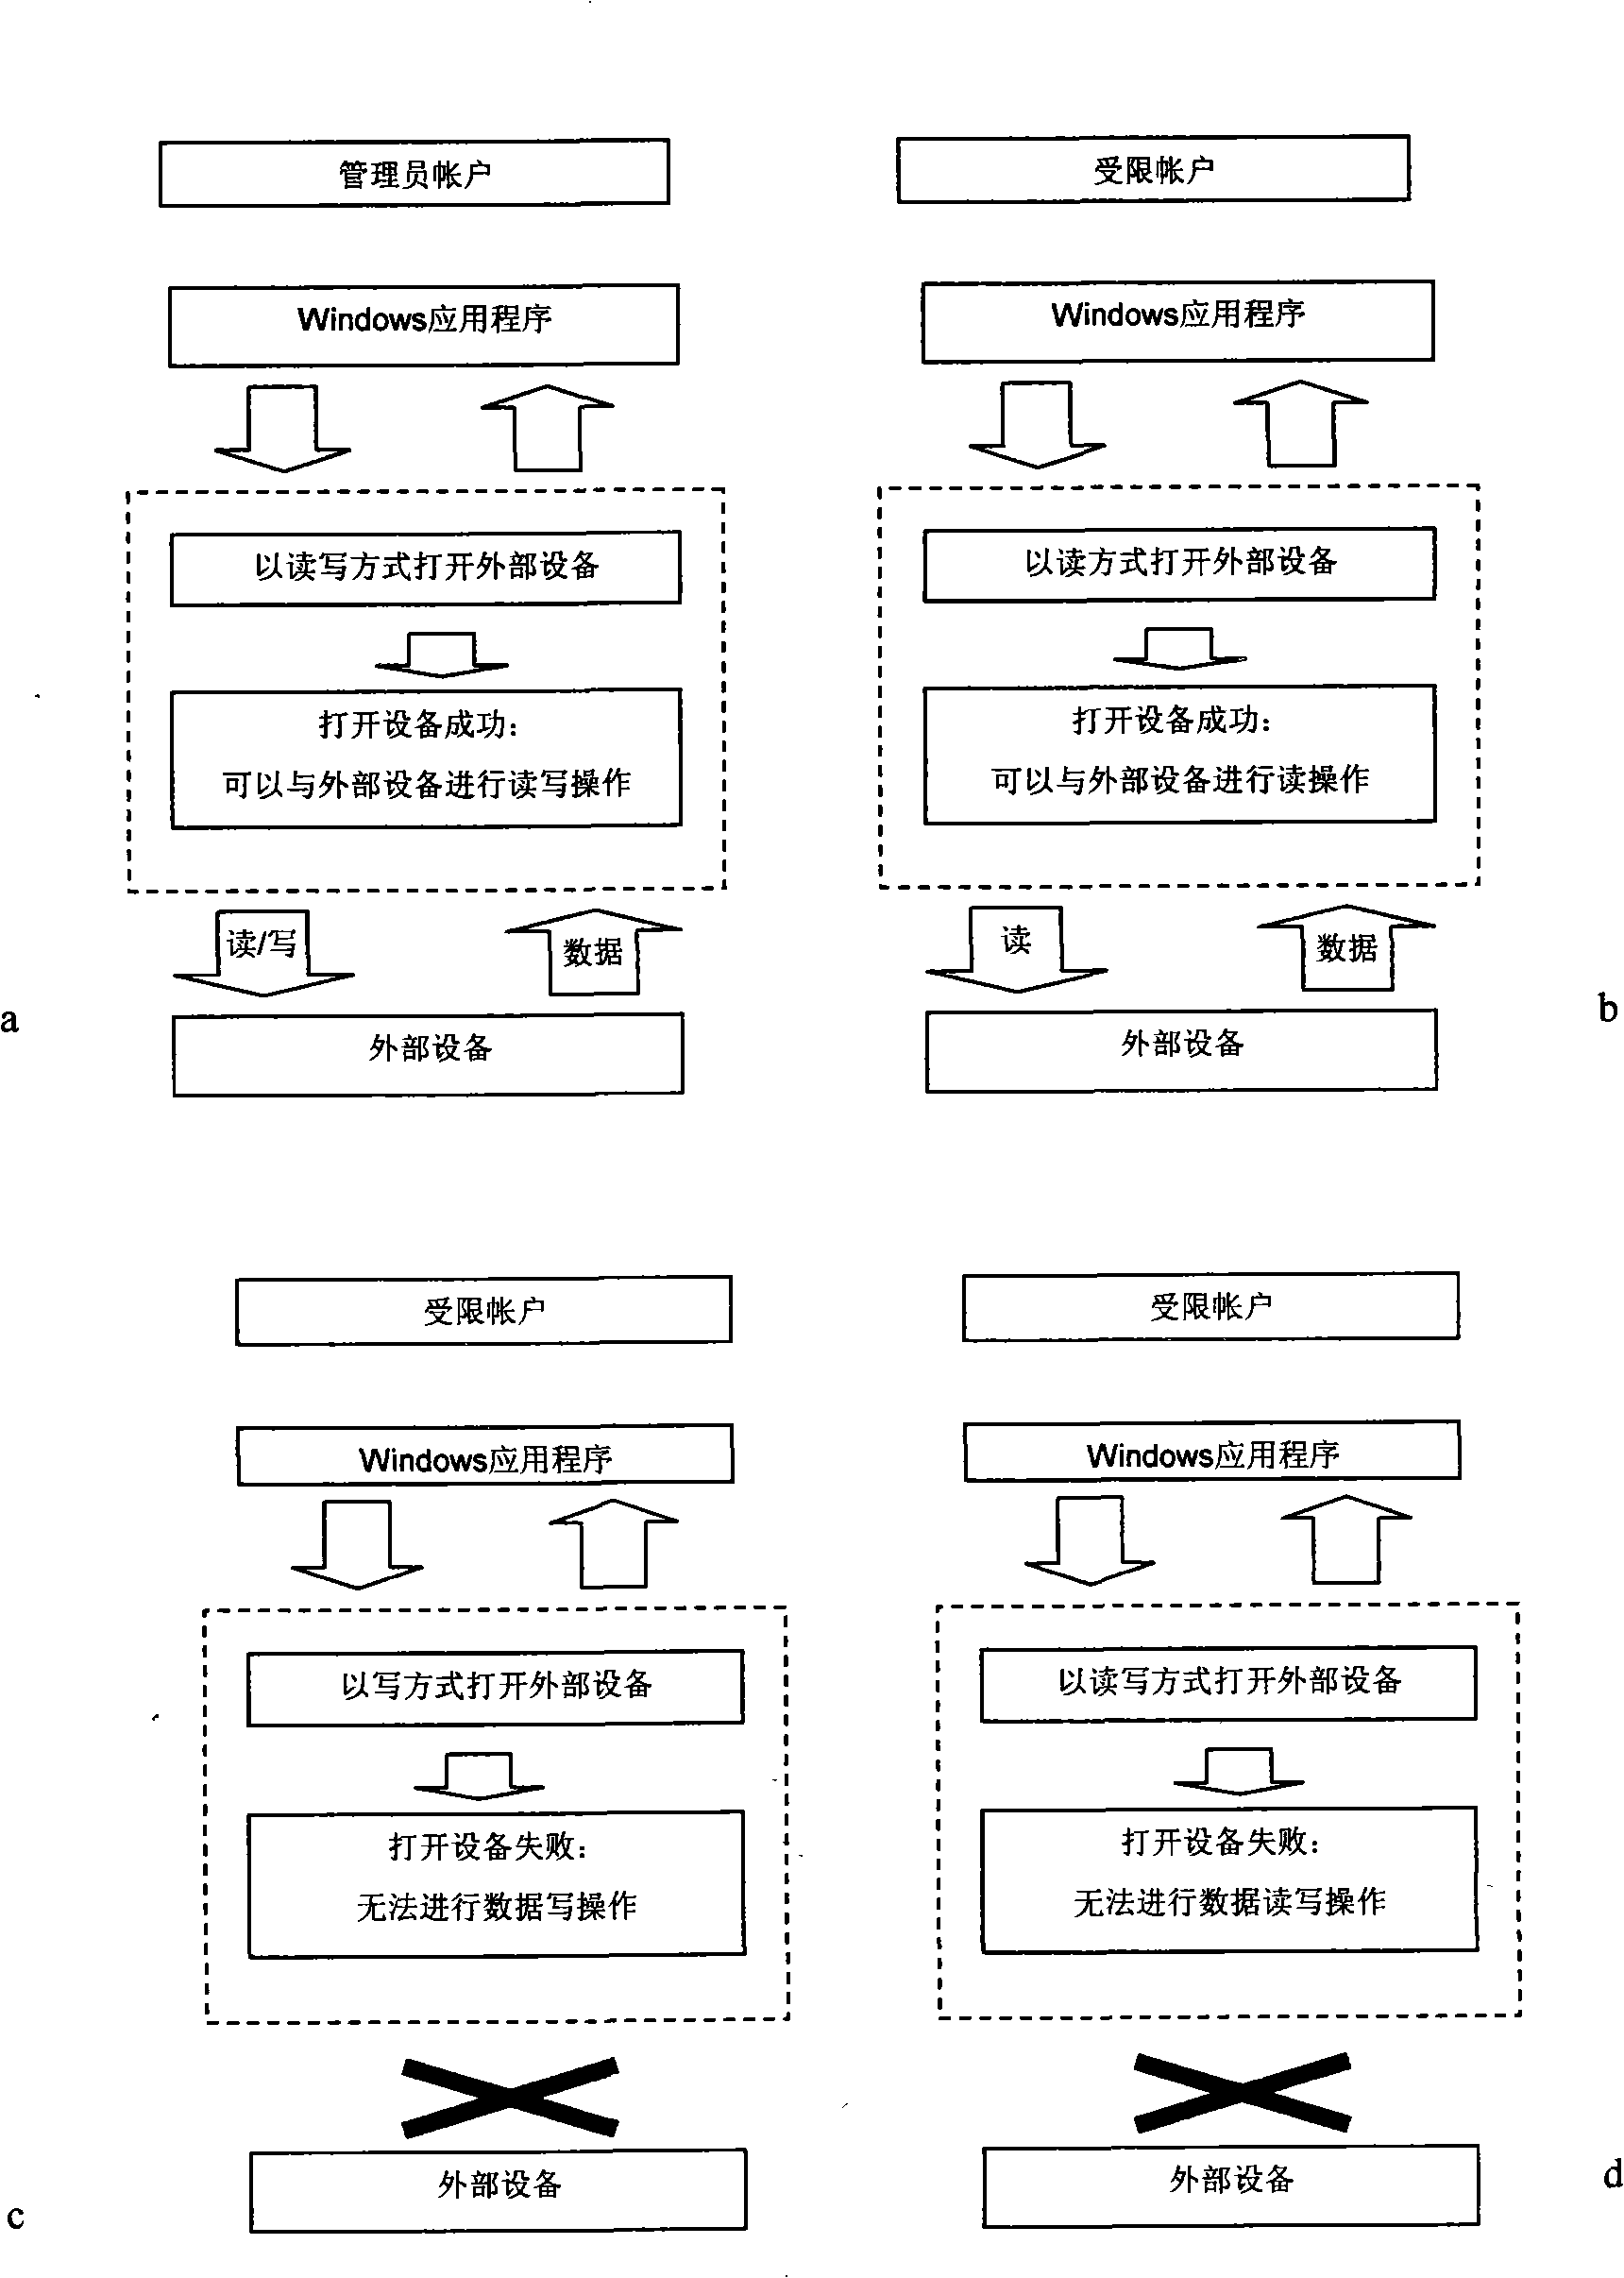 Method for raising user's authority for limitation account under Windows system